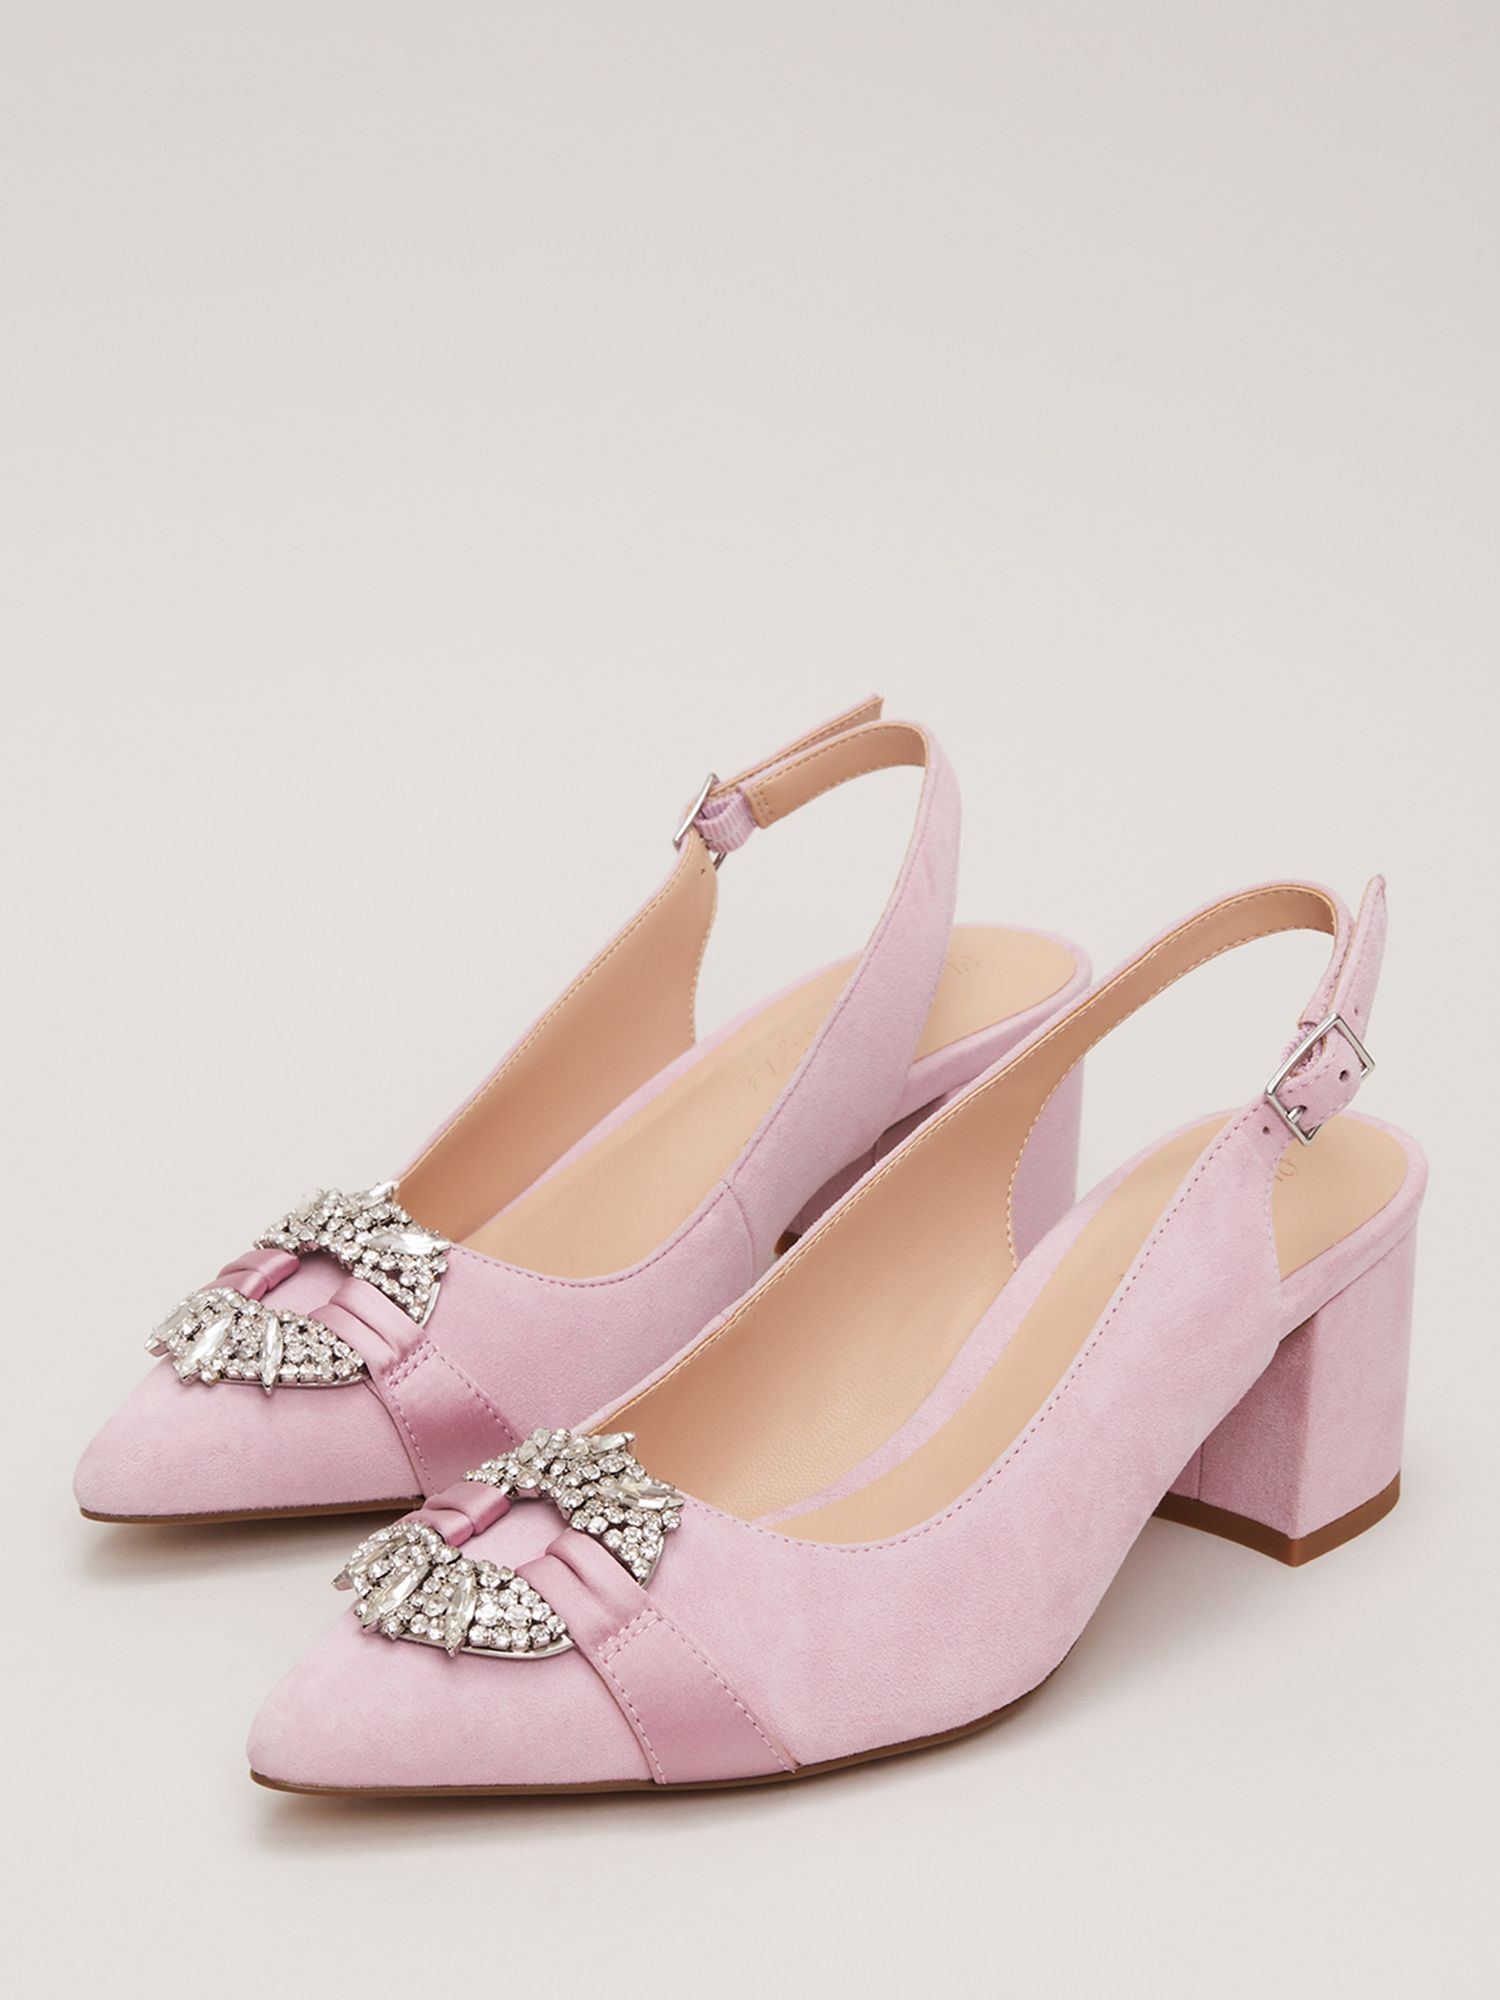 Phase Eight Pointed Embellished Block Heel Shoes, Pink, EU36